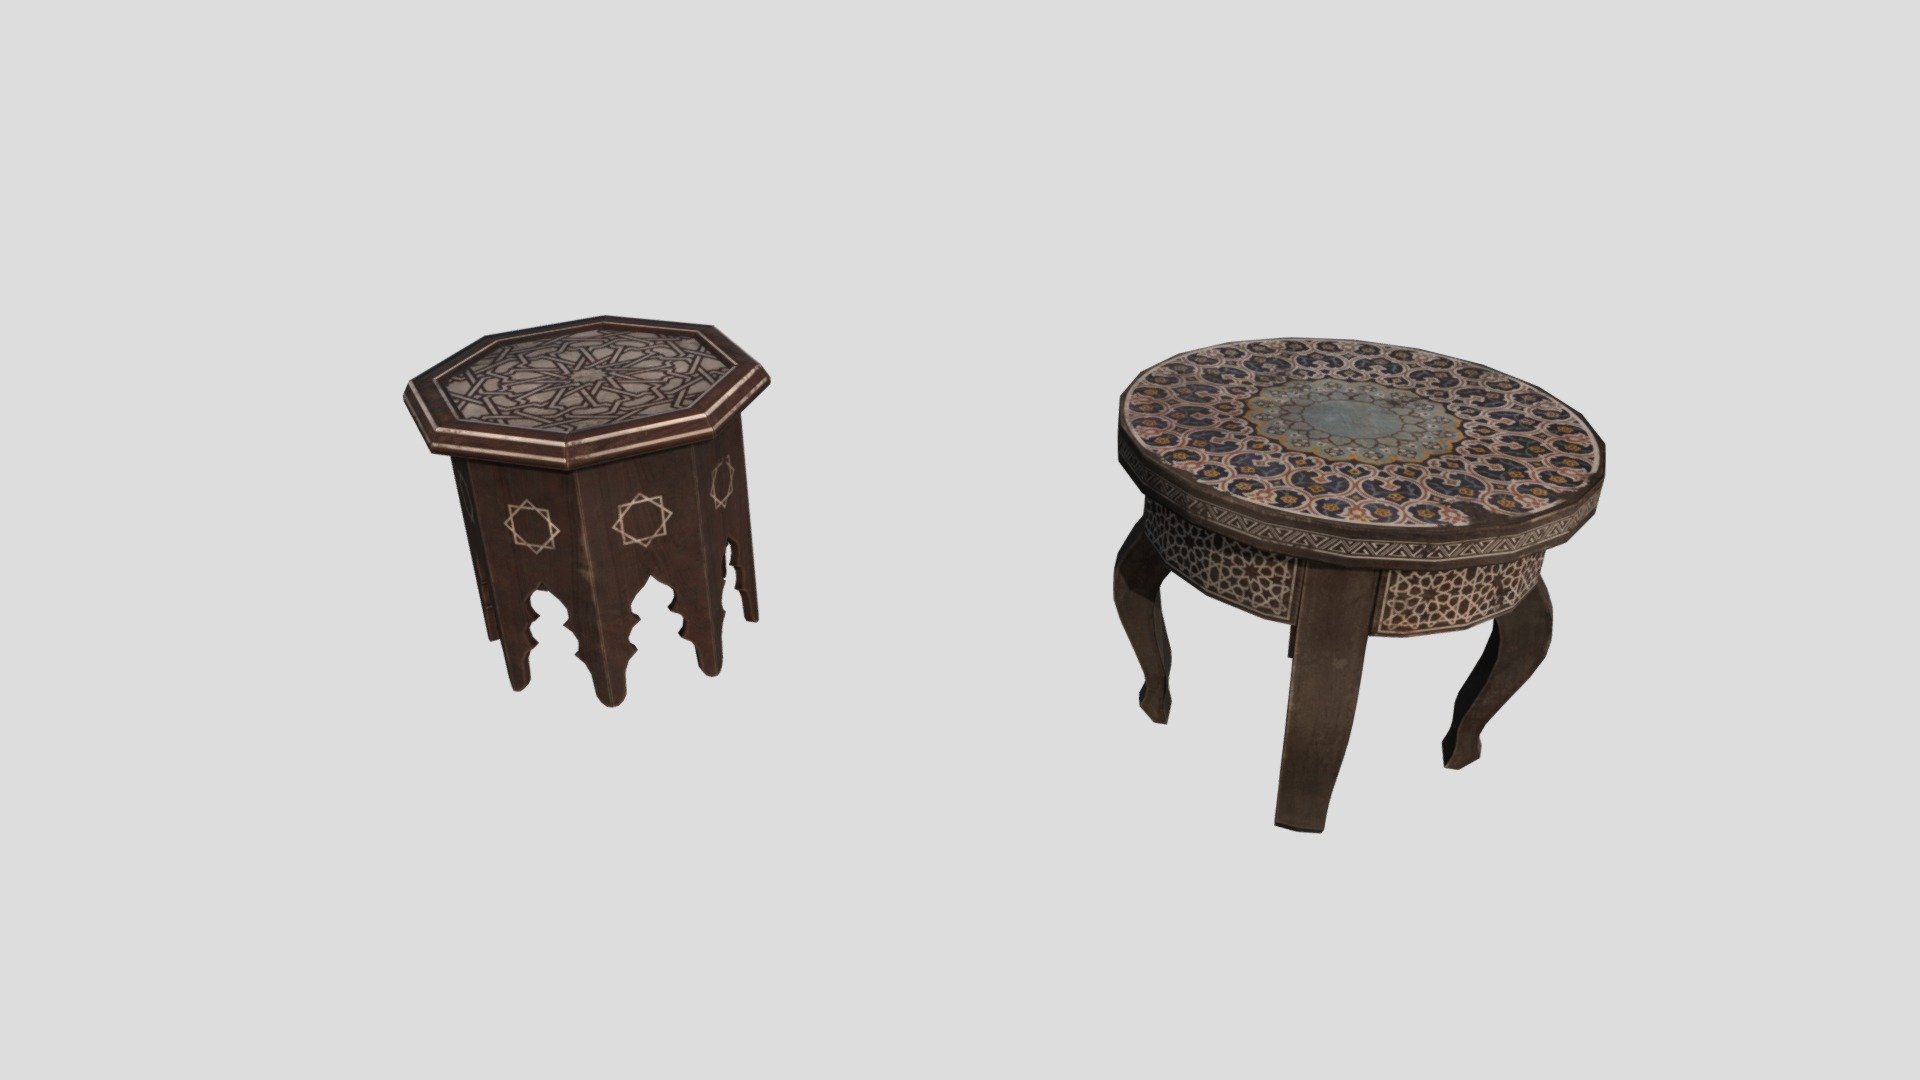 3D Table, Nightstands
The pack has highly detailed table ready for use in your project. Just drag and drop prefab into your scene and achieve beautiful results in no time. Available formats FBX, 3DS Max 2017



We are here to empower the creators. Please contact us via the [Contact US](https://aaanimators.com/#contact-area) page if you are having issues with our assets. 




The following document provides a highly detailed description of the asset:
[READ ME](https://medium.com/@aaanimators/3d-asset-pack-low-poly-tables-pack-arabic-21125c8bb0f7)




**Mesh complexities:**


Table_04 1344 verts; 1260 tris 

Table_05 812 verts; 792 tris 



Includes 2 sets of textures with 4 materials:



● Diffuse

● Gloss

● Normal

● Specular - Arabic Nightstands - Buy Royalty Free 3D model by aaanimators 3d model